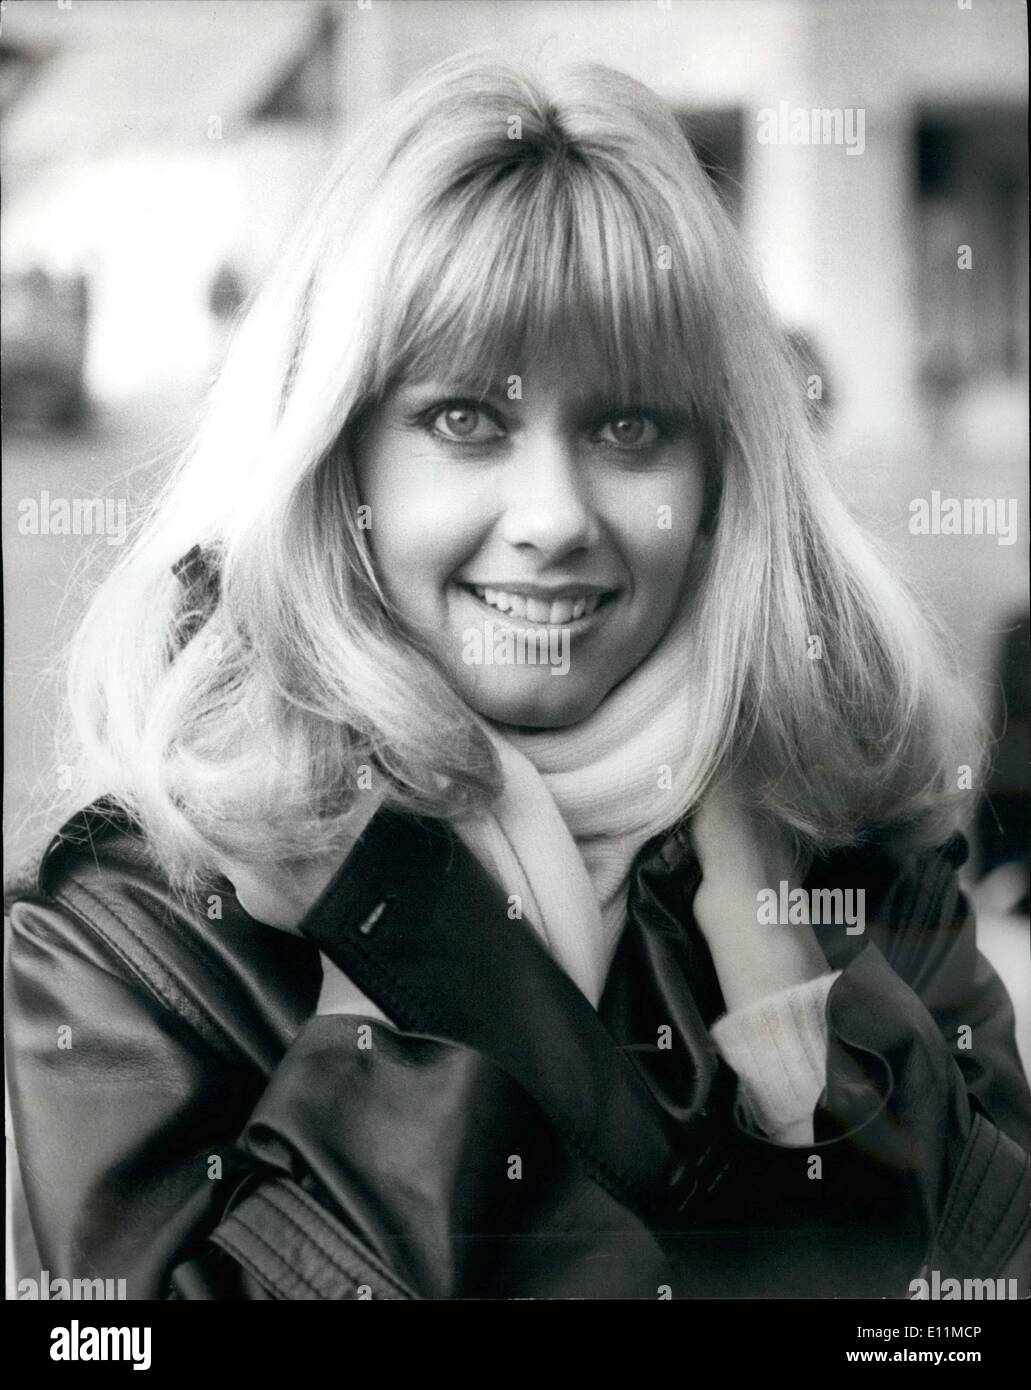 Nov. 11, 1978 - Olivia Newton-John press conference: Pop star Olivia Newton-John, the Grease film girl who has arrived back in Britain for a series of concert which open yesterday at the Rainbow theater. And she has also released her latest album called ''Totally Hot''. Photo shows Olivia Newton-John pictured at her press conference today. Stock Photo